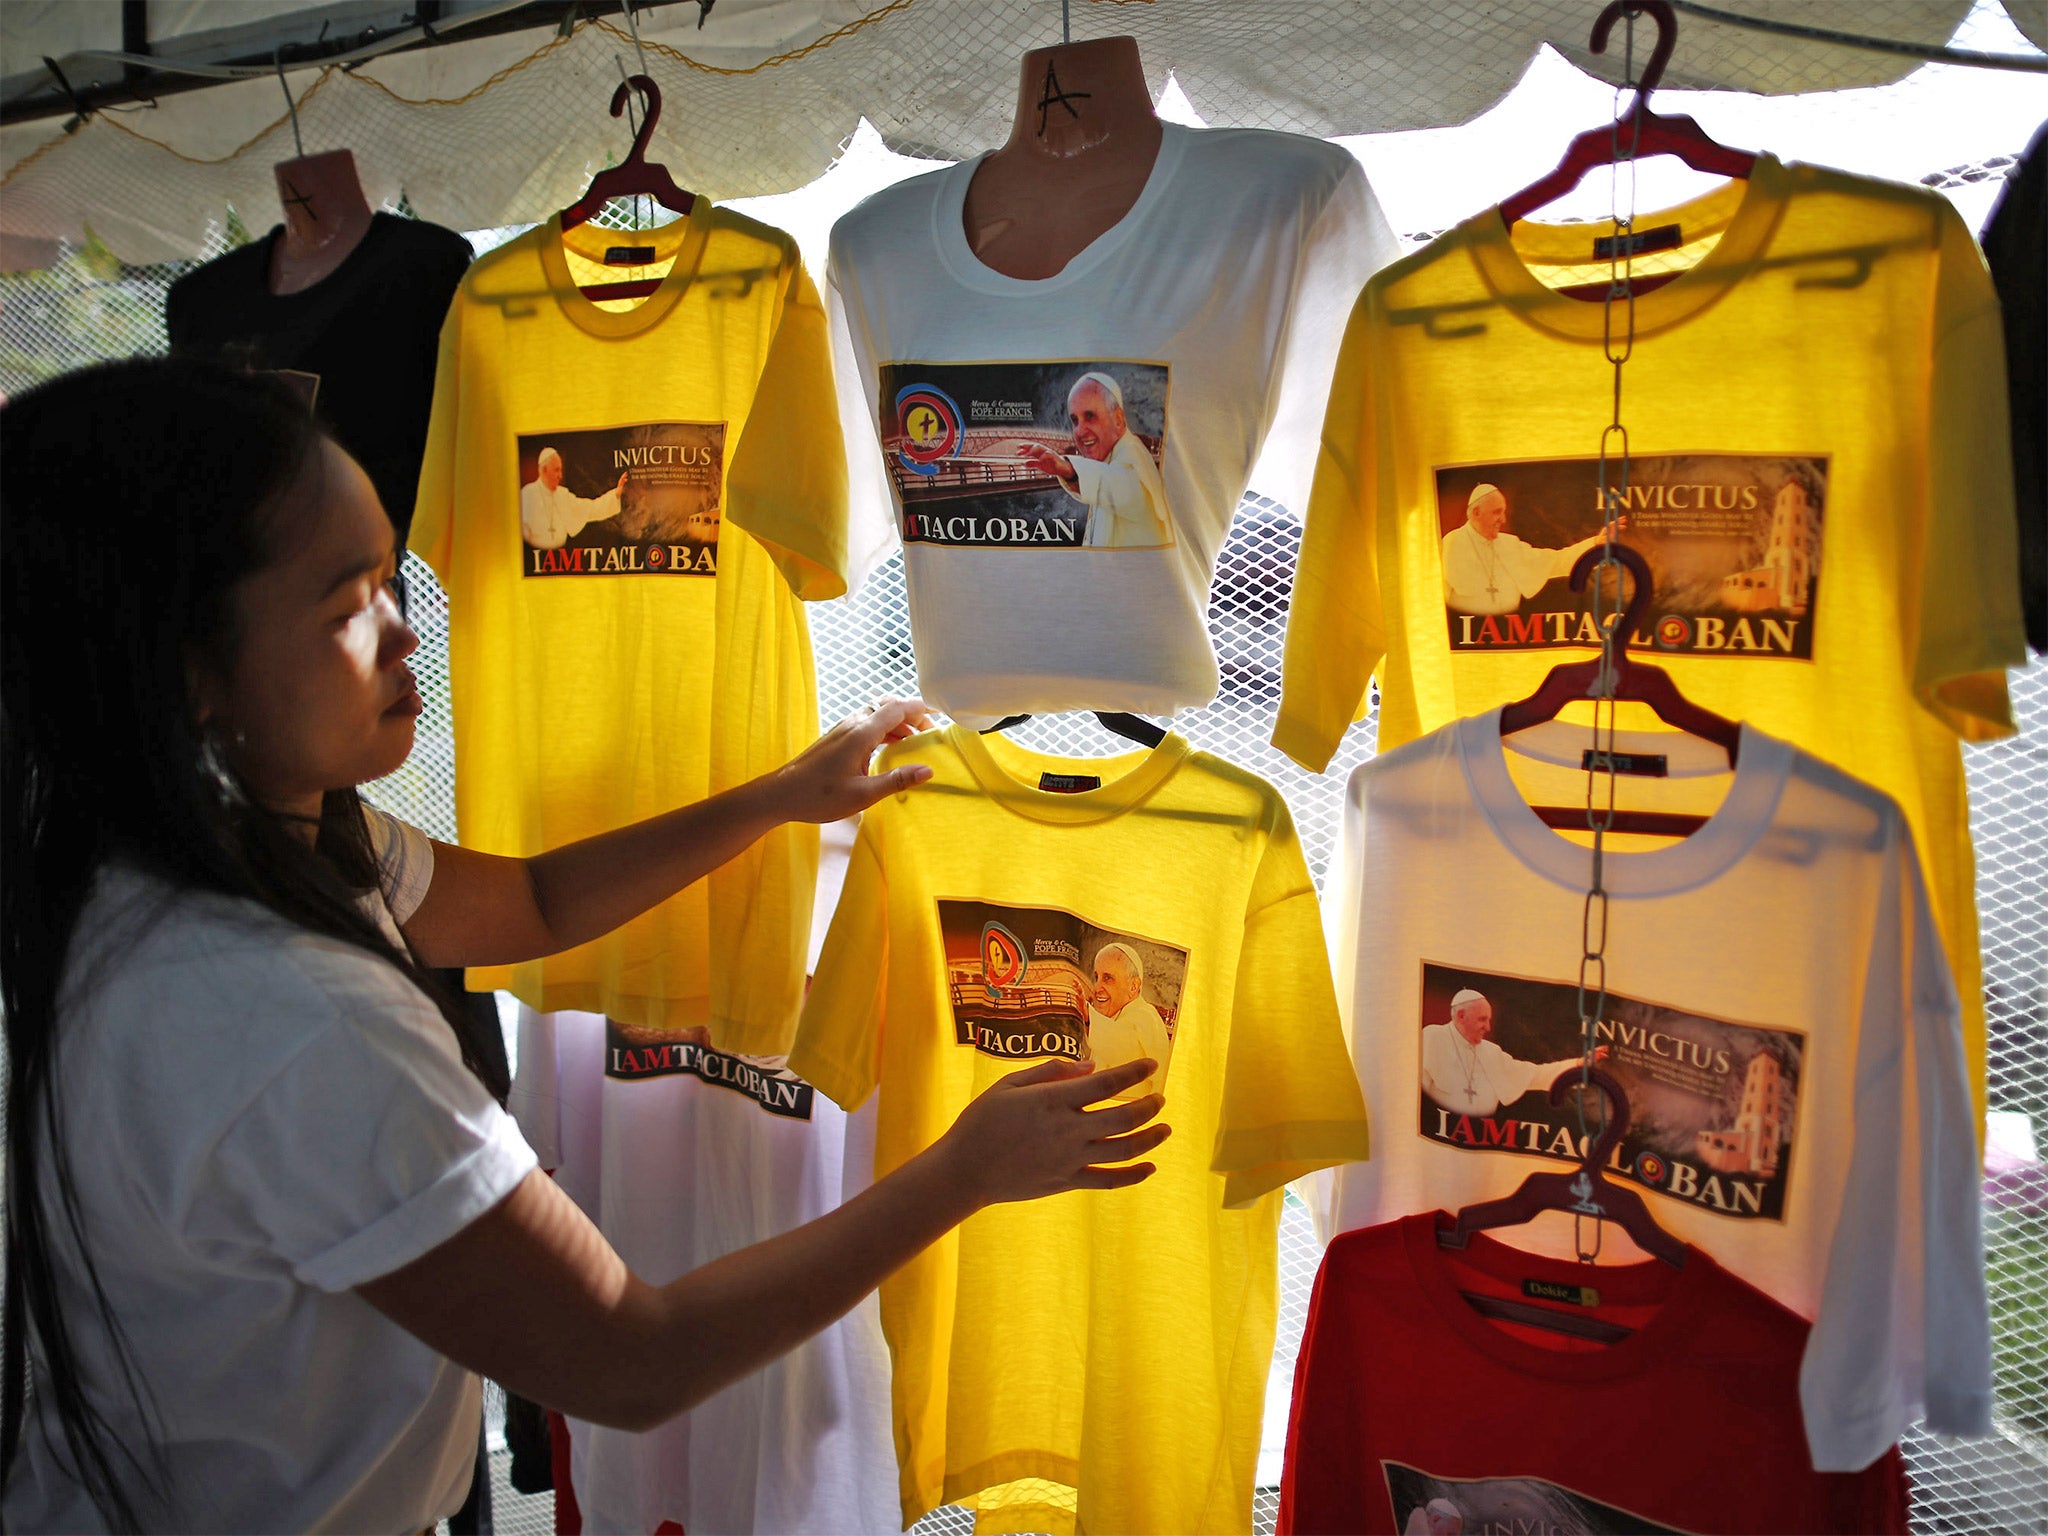 Souvenir Pope Francis t-shirts for sale in Tacloban, Philippines, earlier this year (Getty)